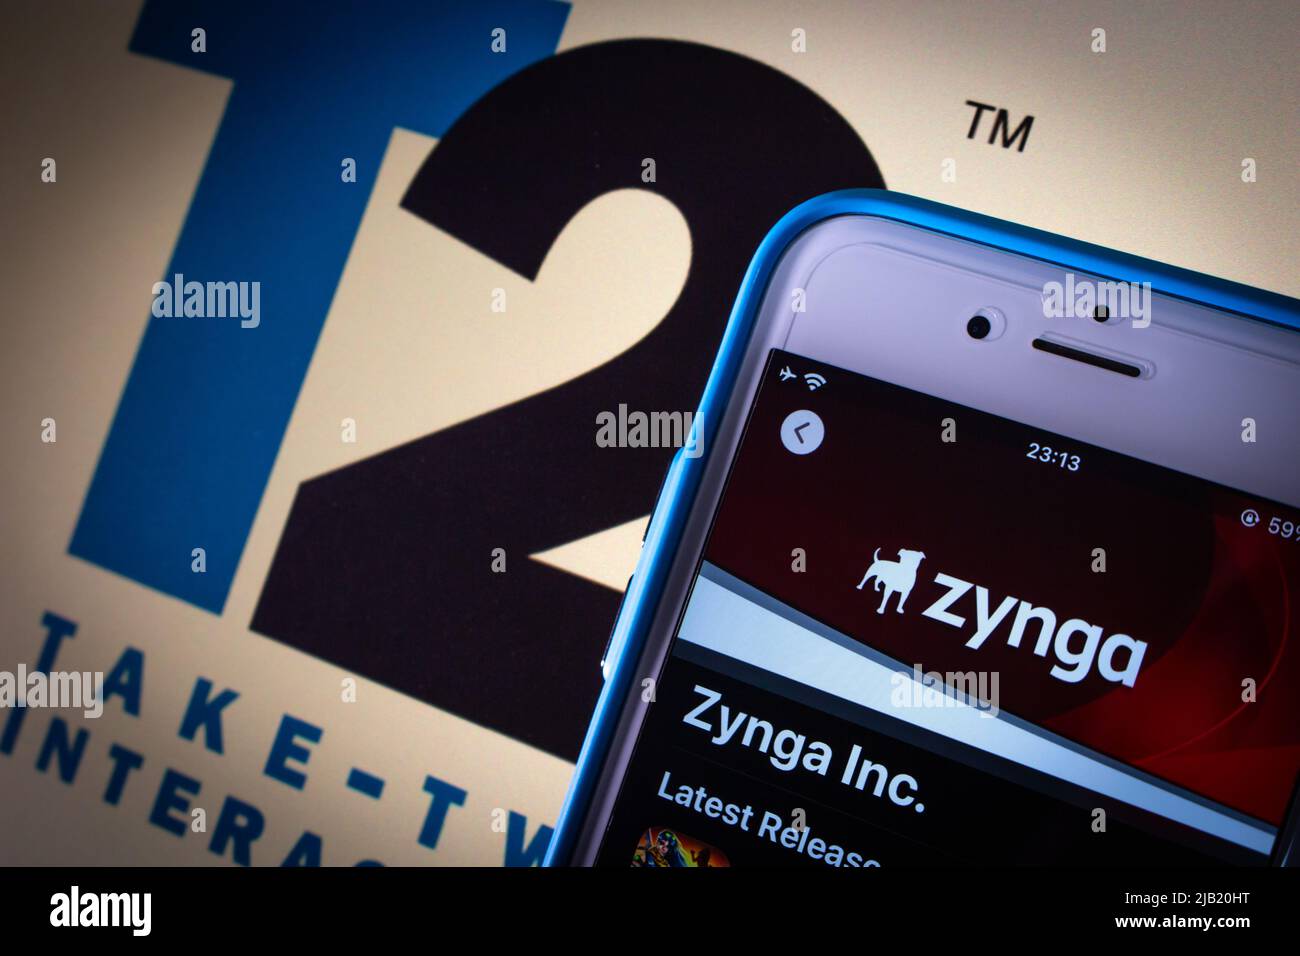 US social game developer Zynga Inc. on App Sore & Take-Two Interactive logo in dark mood. Take-Two announced its intent to acquire Zynga in Jan 2022 Stock Photo